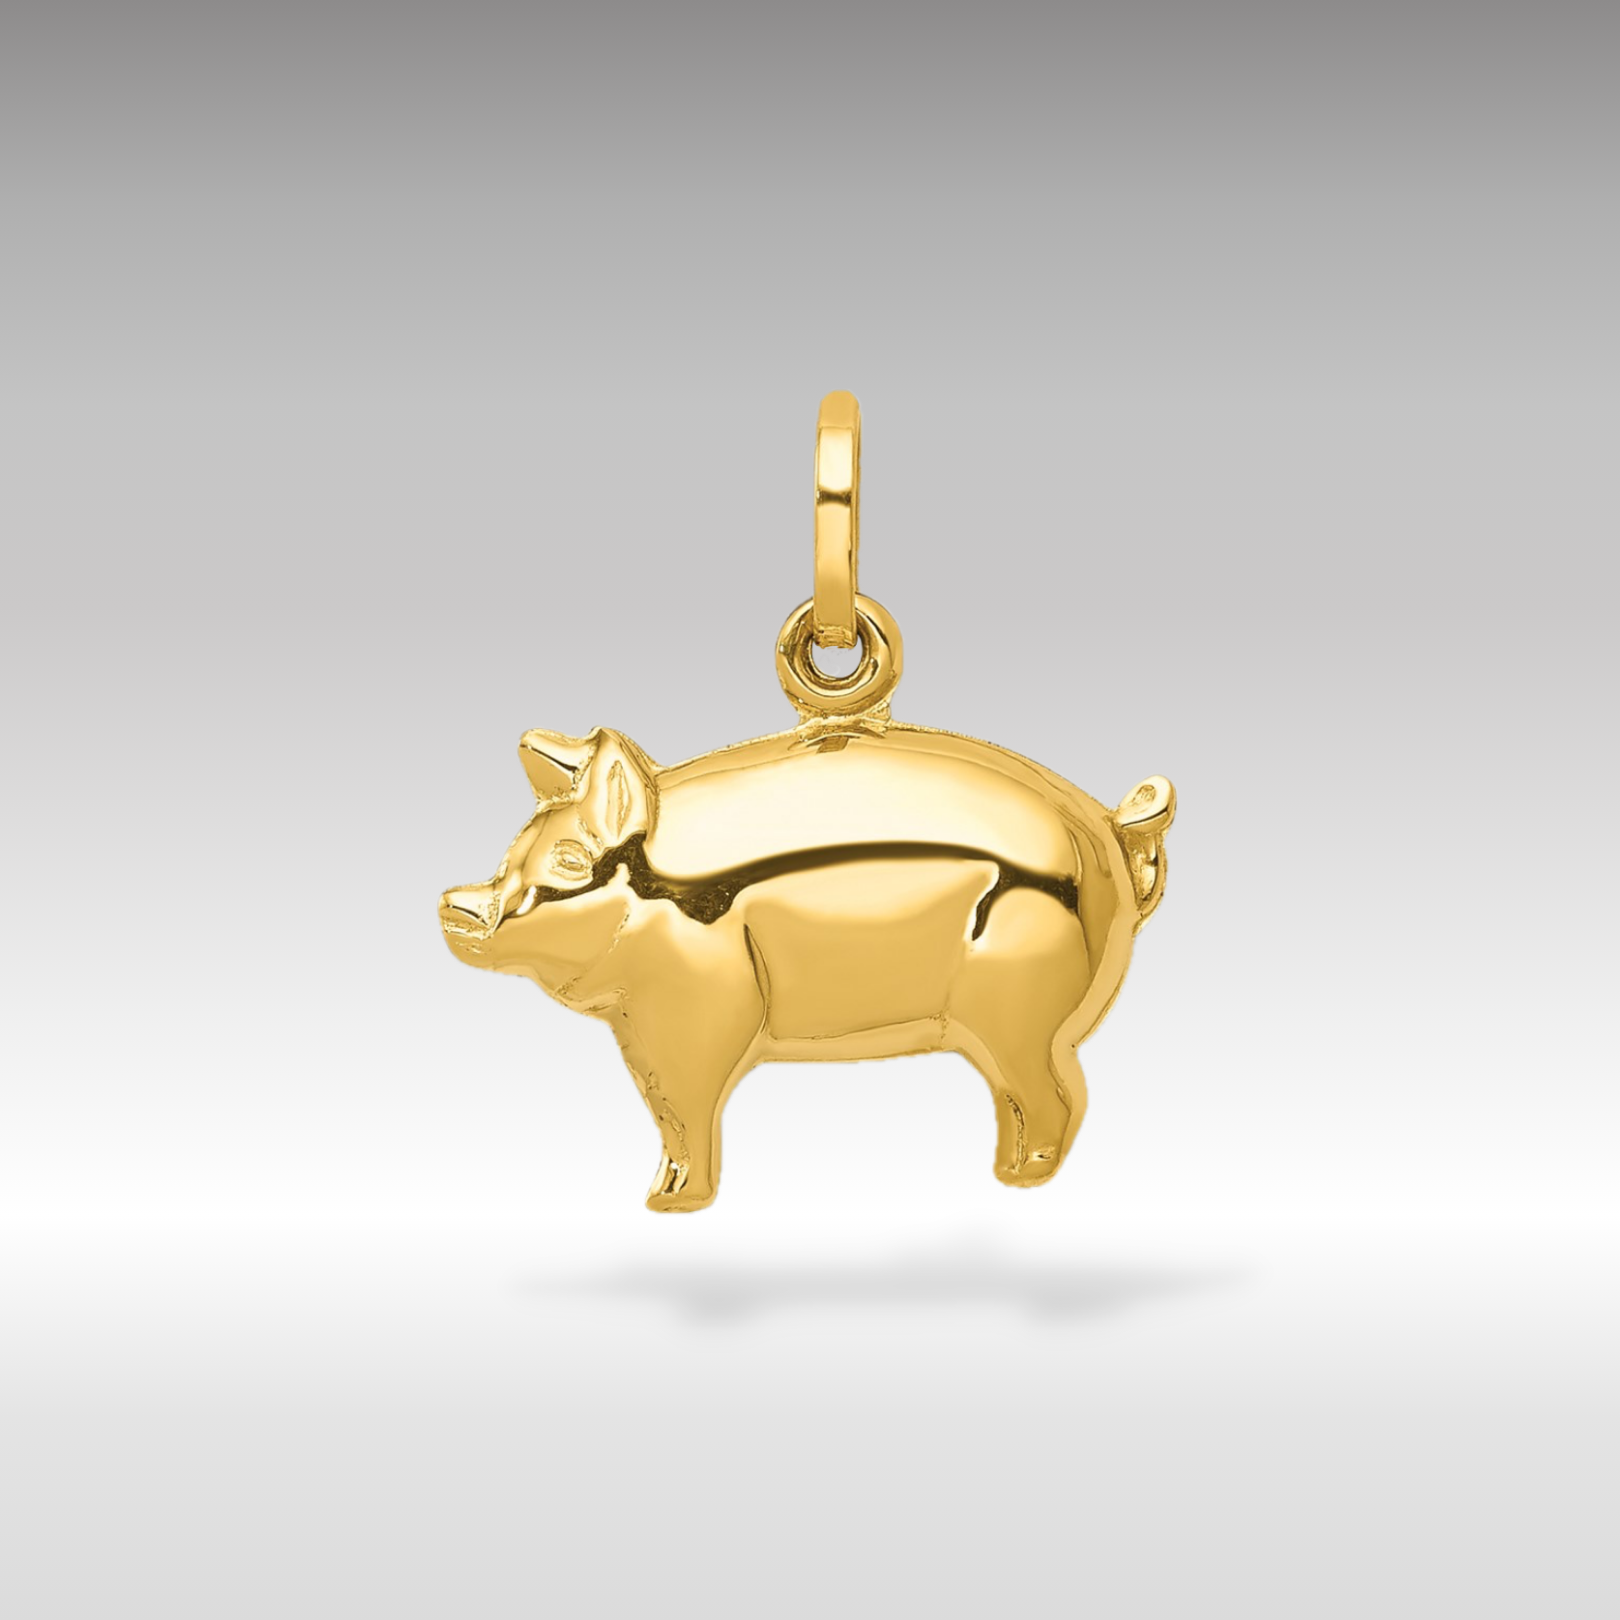 14K Gold 3D Pig Pendant - Charlie & Co. Jewelry